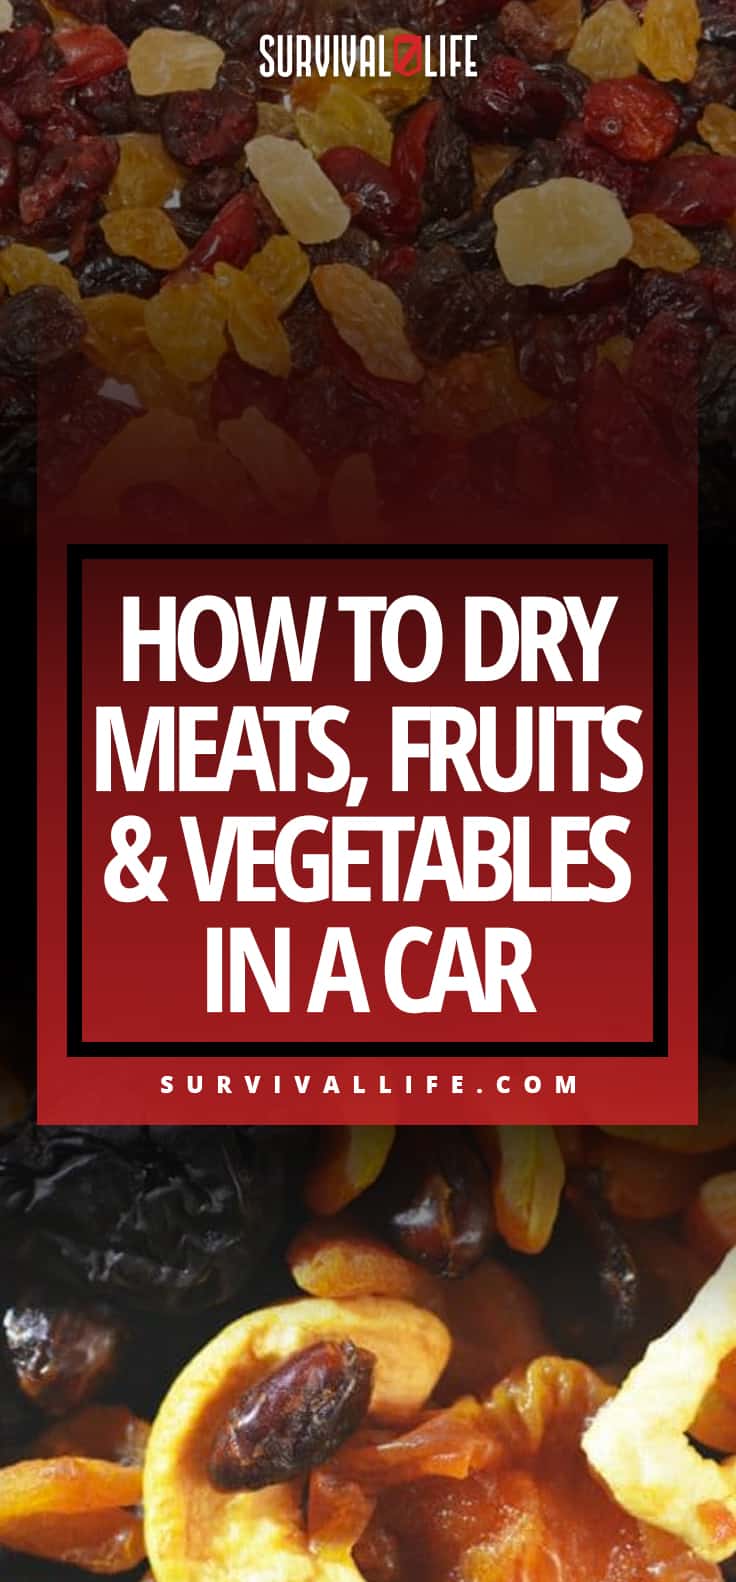 How To Dry Meats, Fruits & Vegetables In A Car